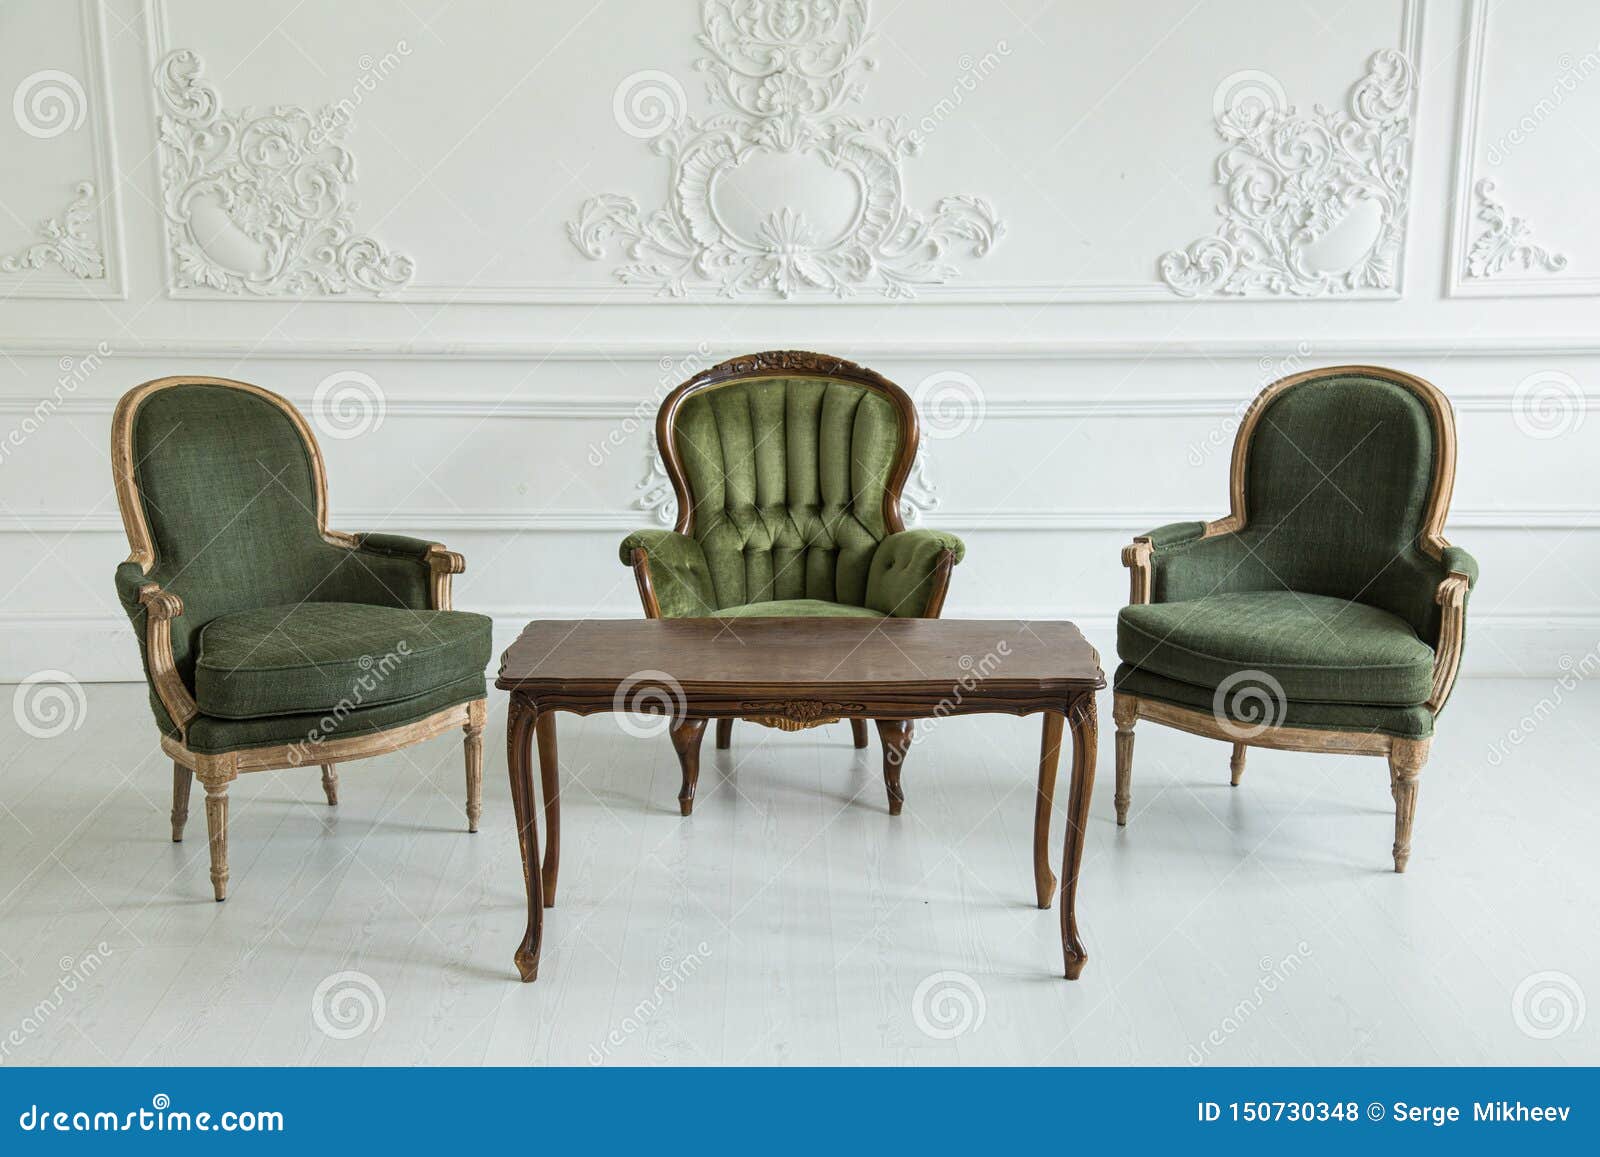 Career Frenzy lineup Vintage Armchairs and Coffee Table Against the Wall with Plaster Stucco  Patterns. Selective Focus Stock Photo - Image of object, decor: 150730348